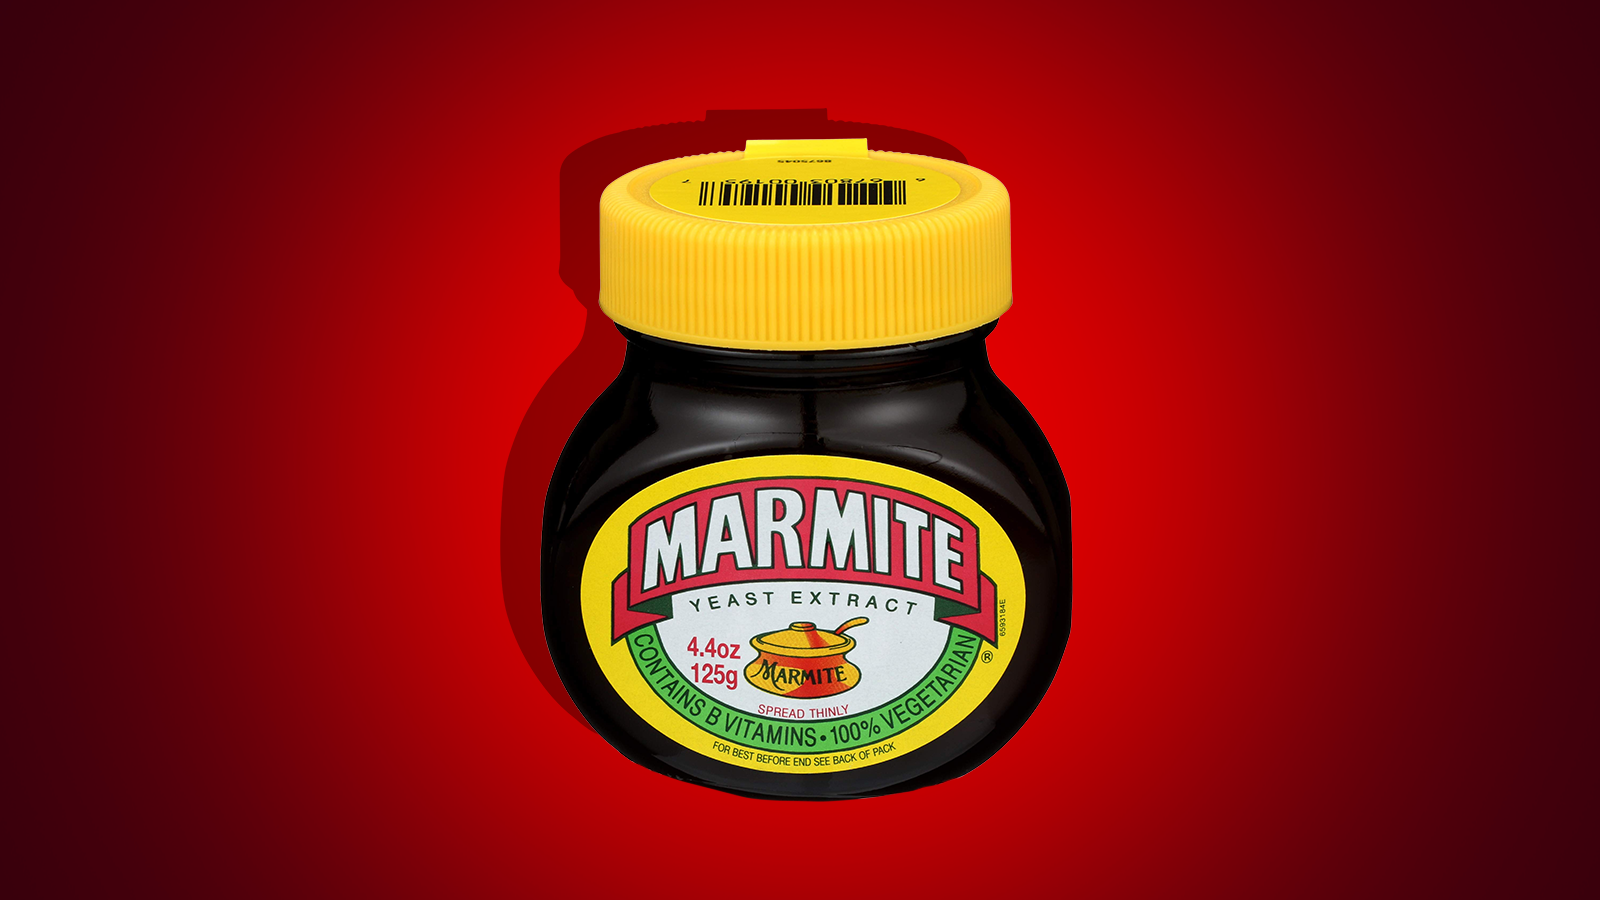 A jar of Marmite against a red backdrop.